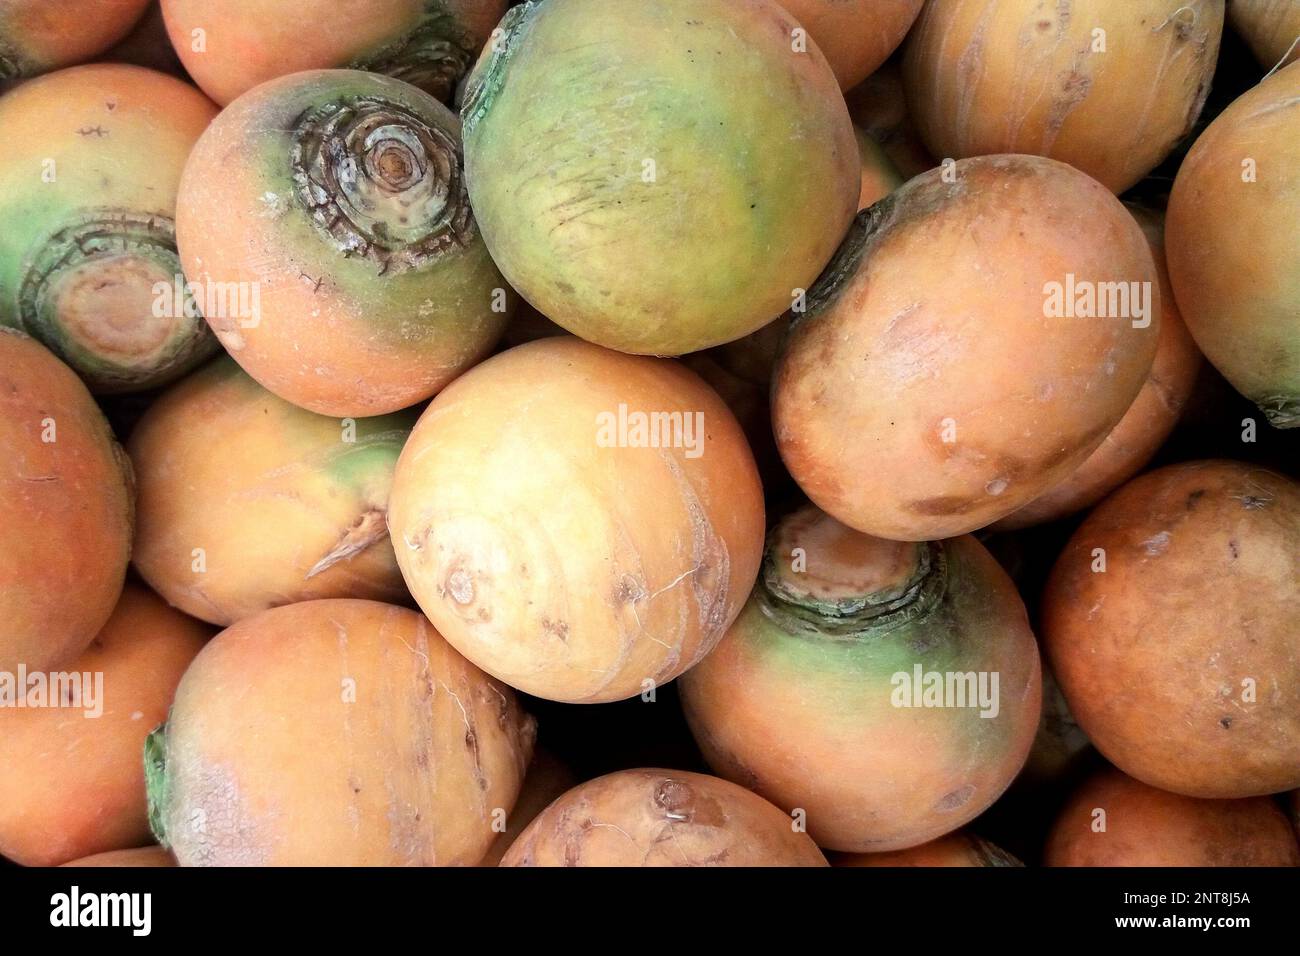 Close-up on a stack of turnip golden balls for sale on a market stall. Stock Photo